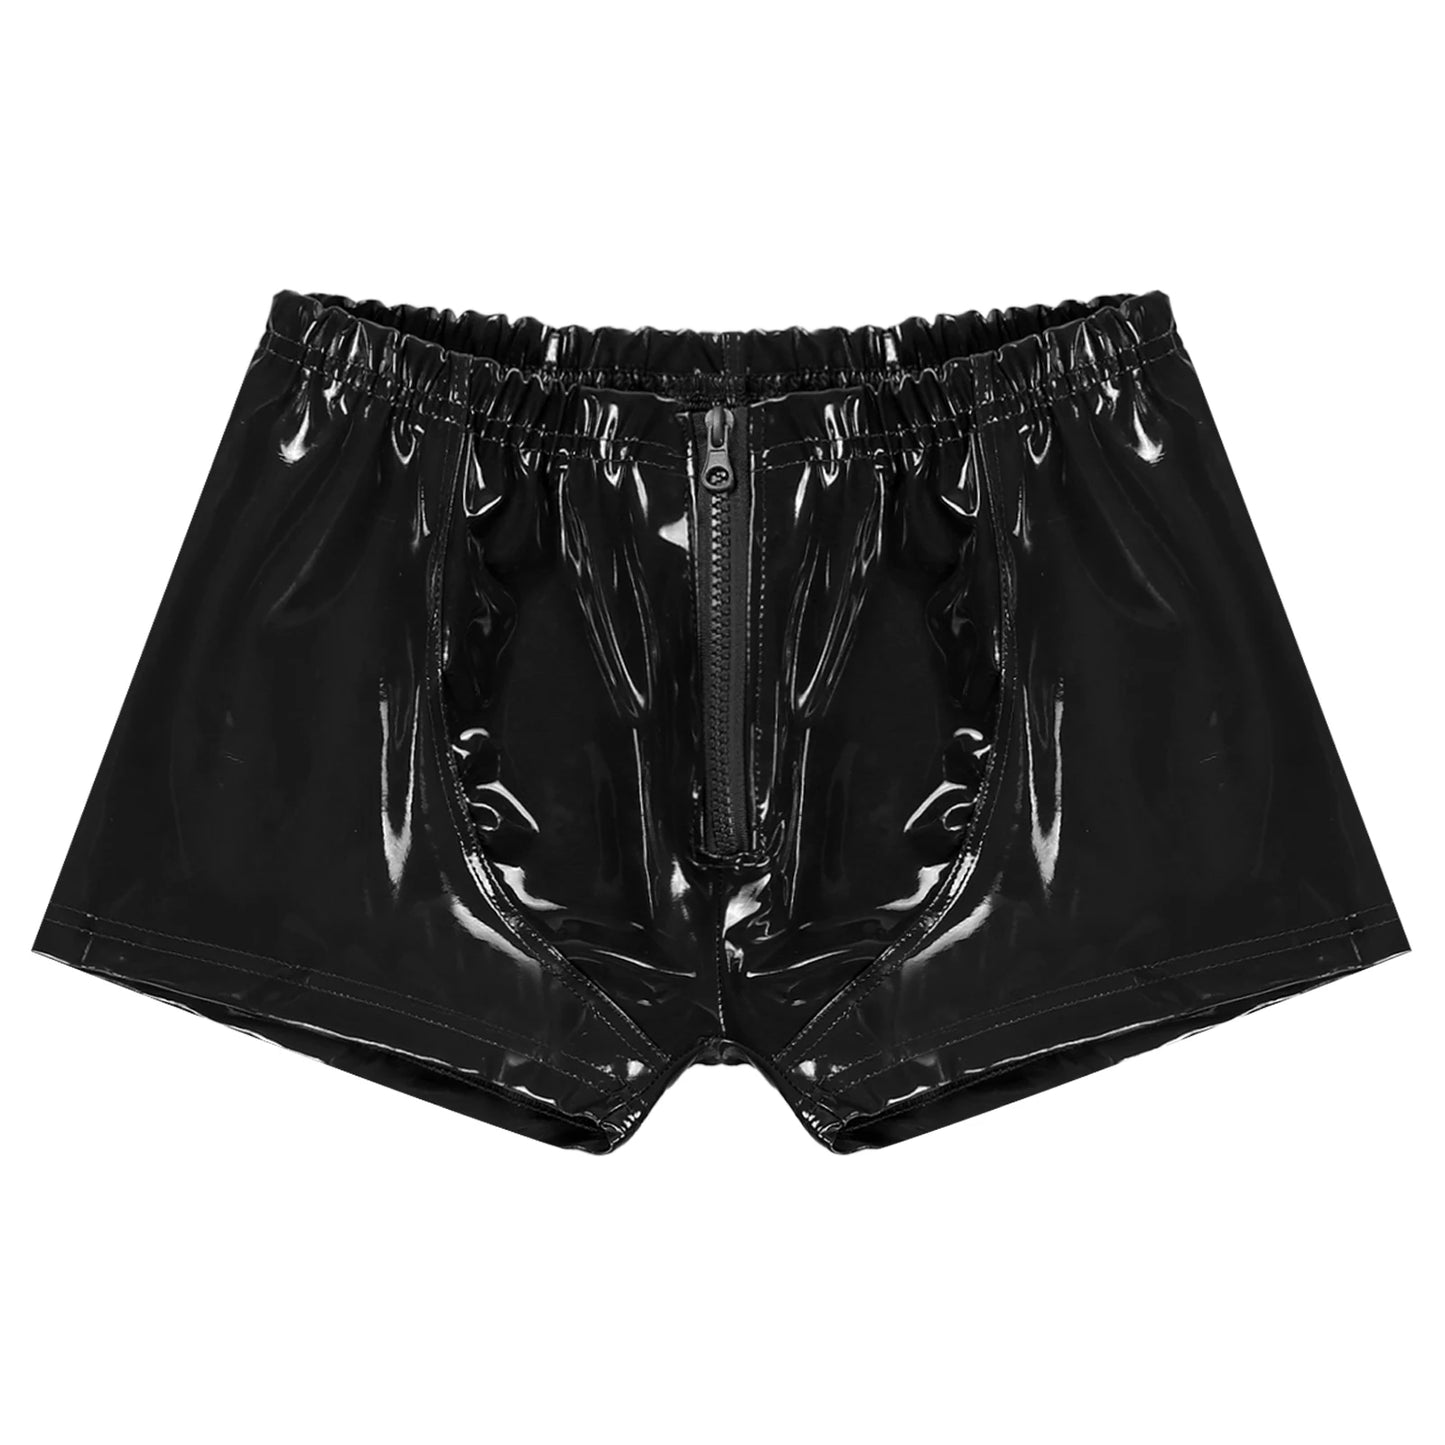 Men's Wet Look Patent Leather Boxer Briefs - Shiny Zipper Front Underwear for Nightclub Party and Stage Performance